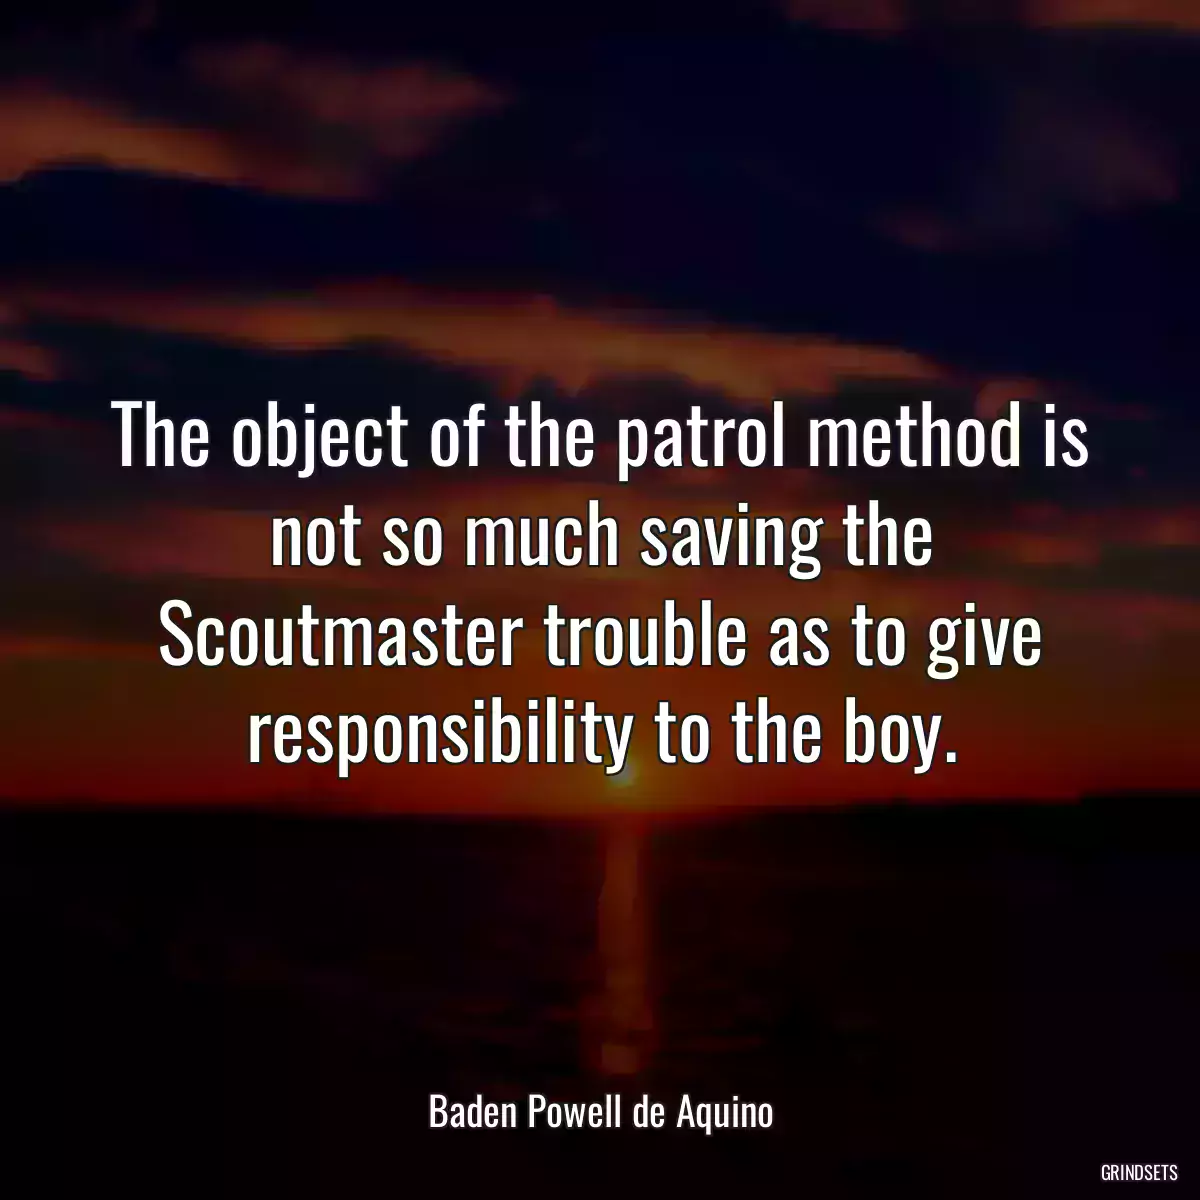 The object of the patrol method is not so much saving the Scoutmaster trouble as to give responsibility to the boy.